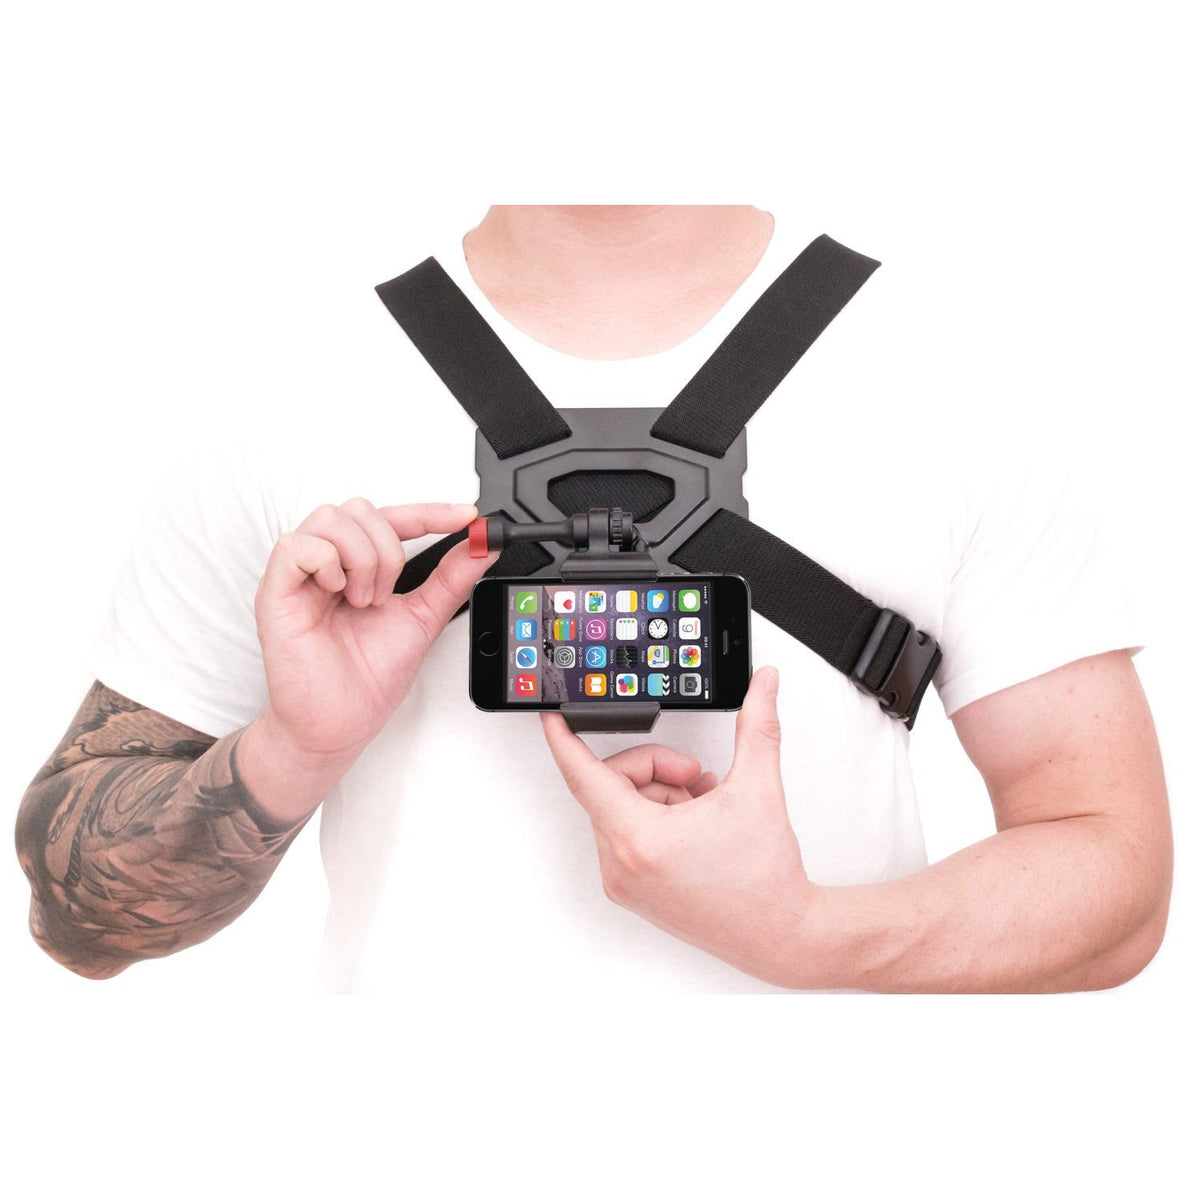 Chest Mount For Fishing With A Phone! ( Smartphone Chest